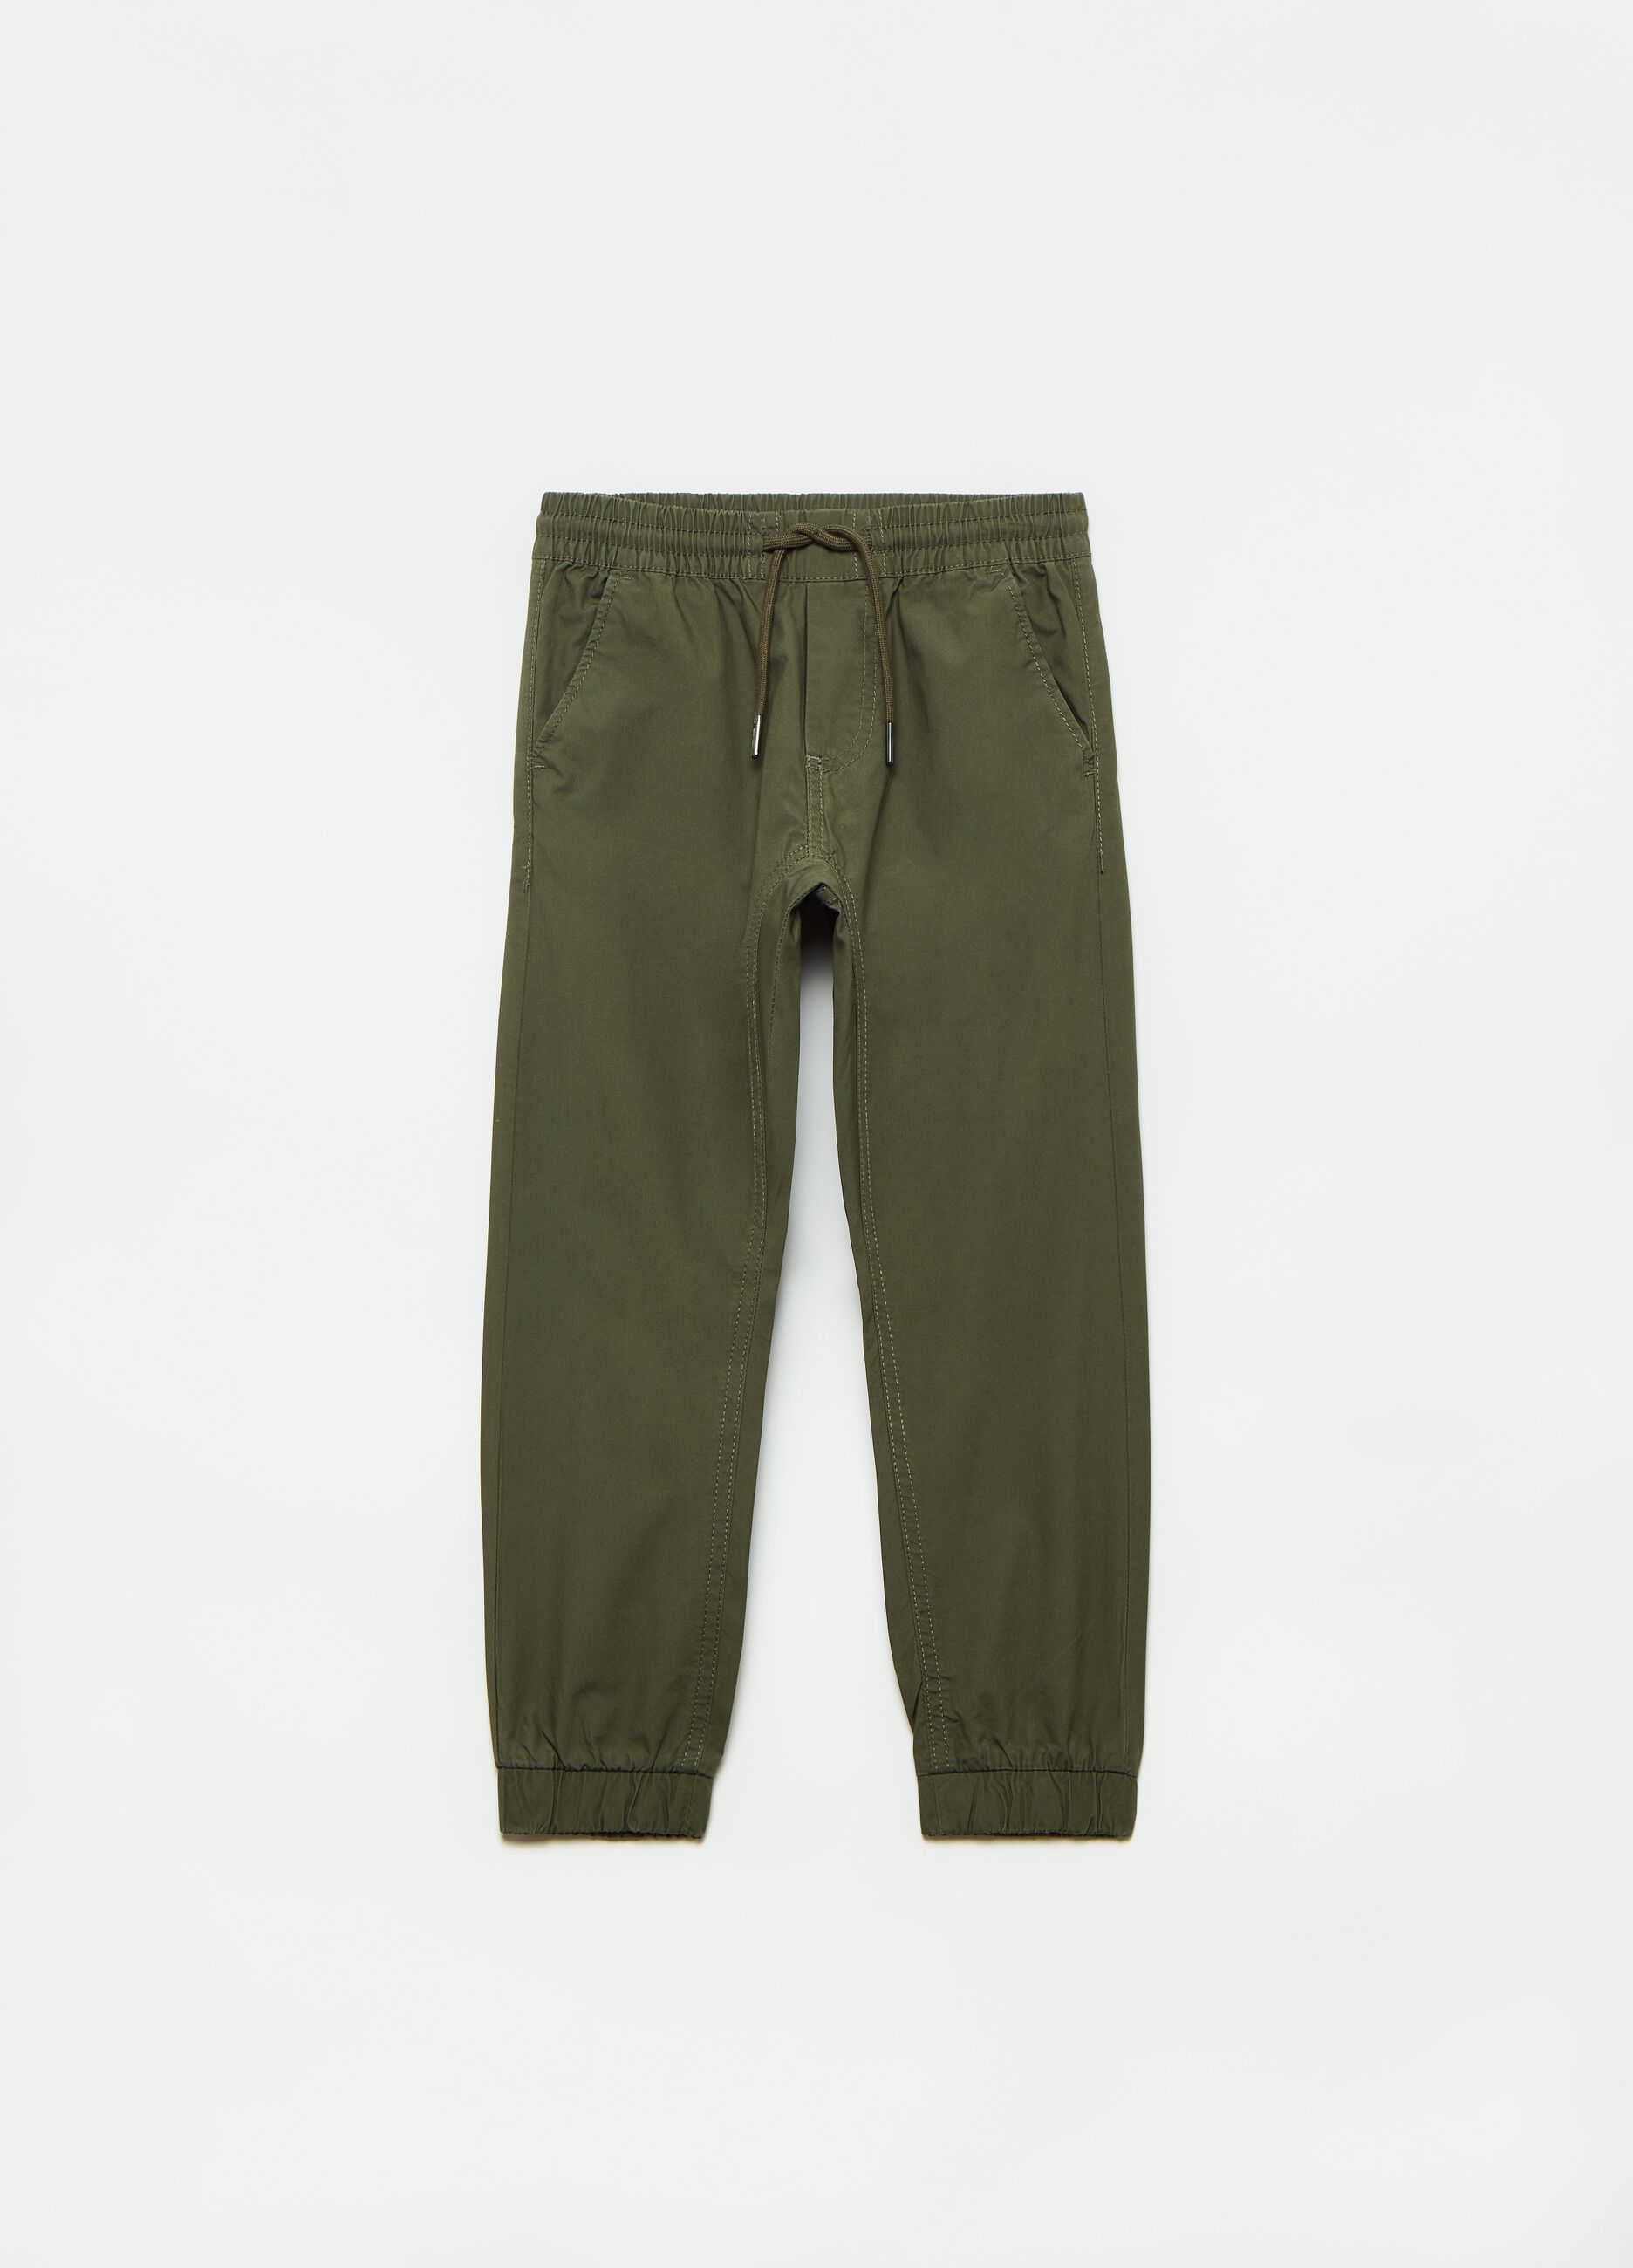 Poplin trousers with drawstring